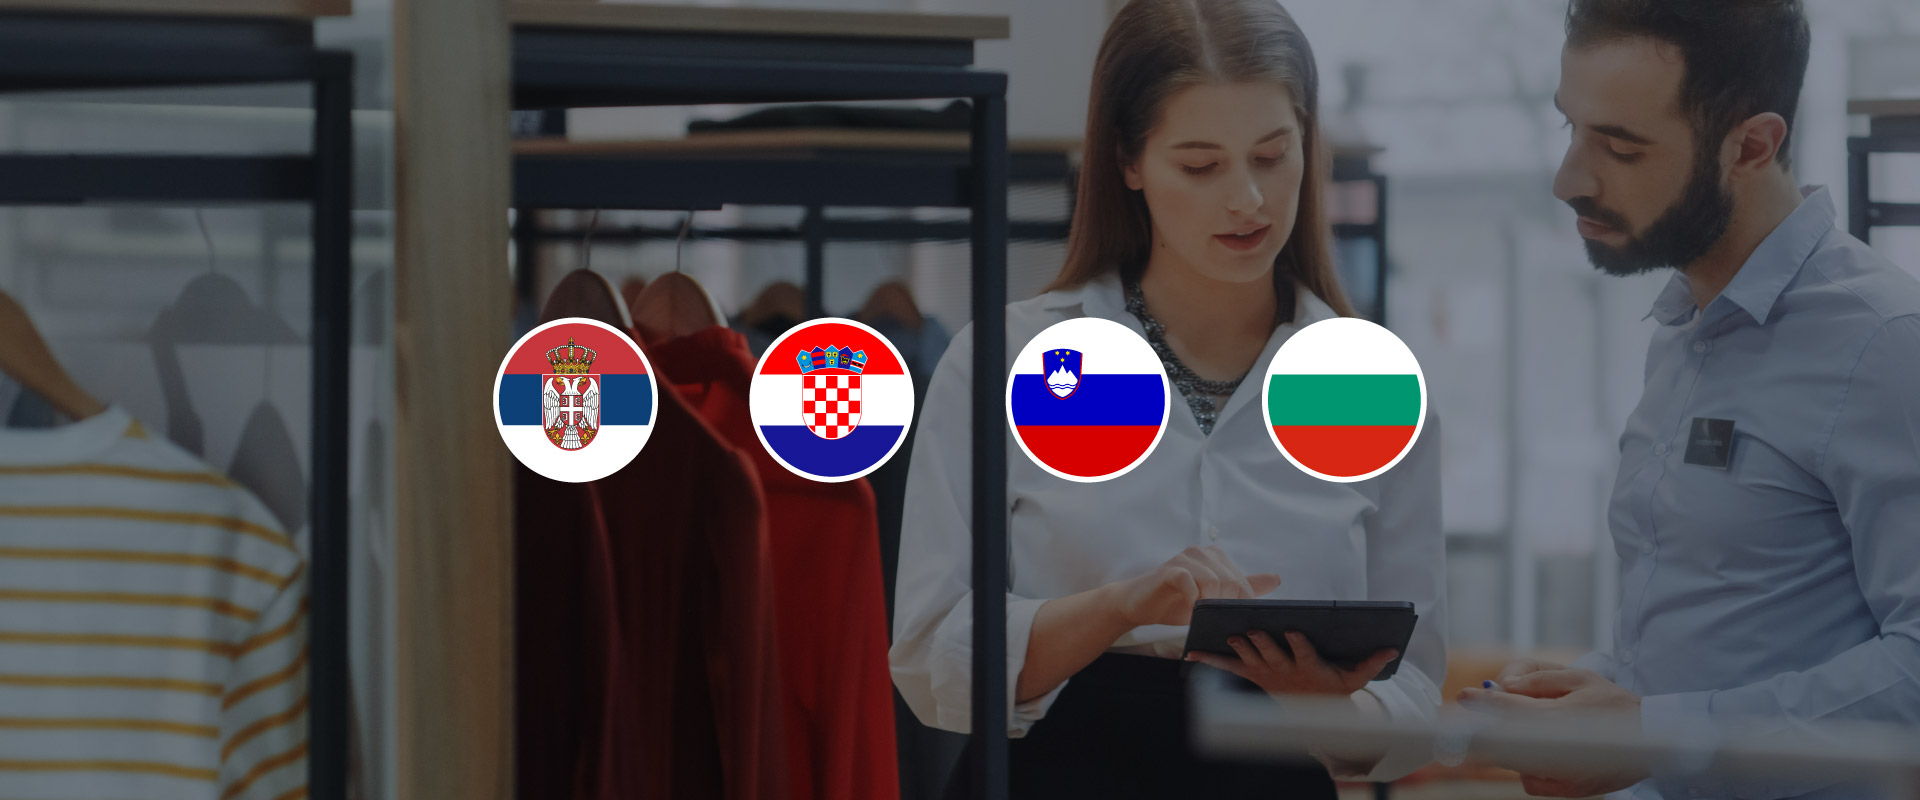 NaviPartner’s NP Retail is now fully compliant with the fiscal laws of Serbia, Croatia, Slovenia and Bulgaria